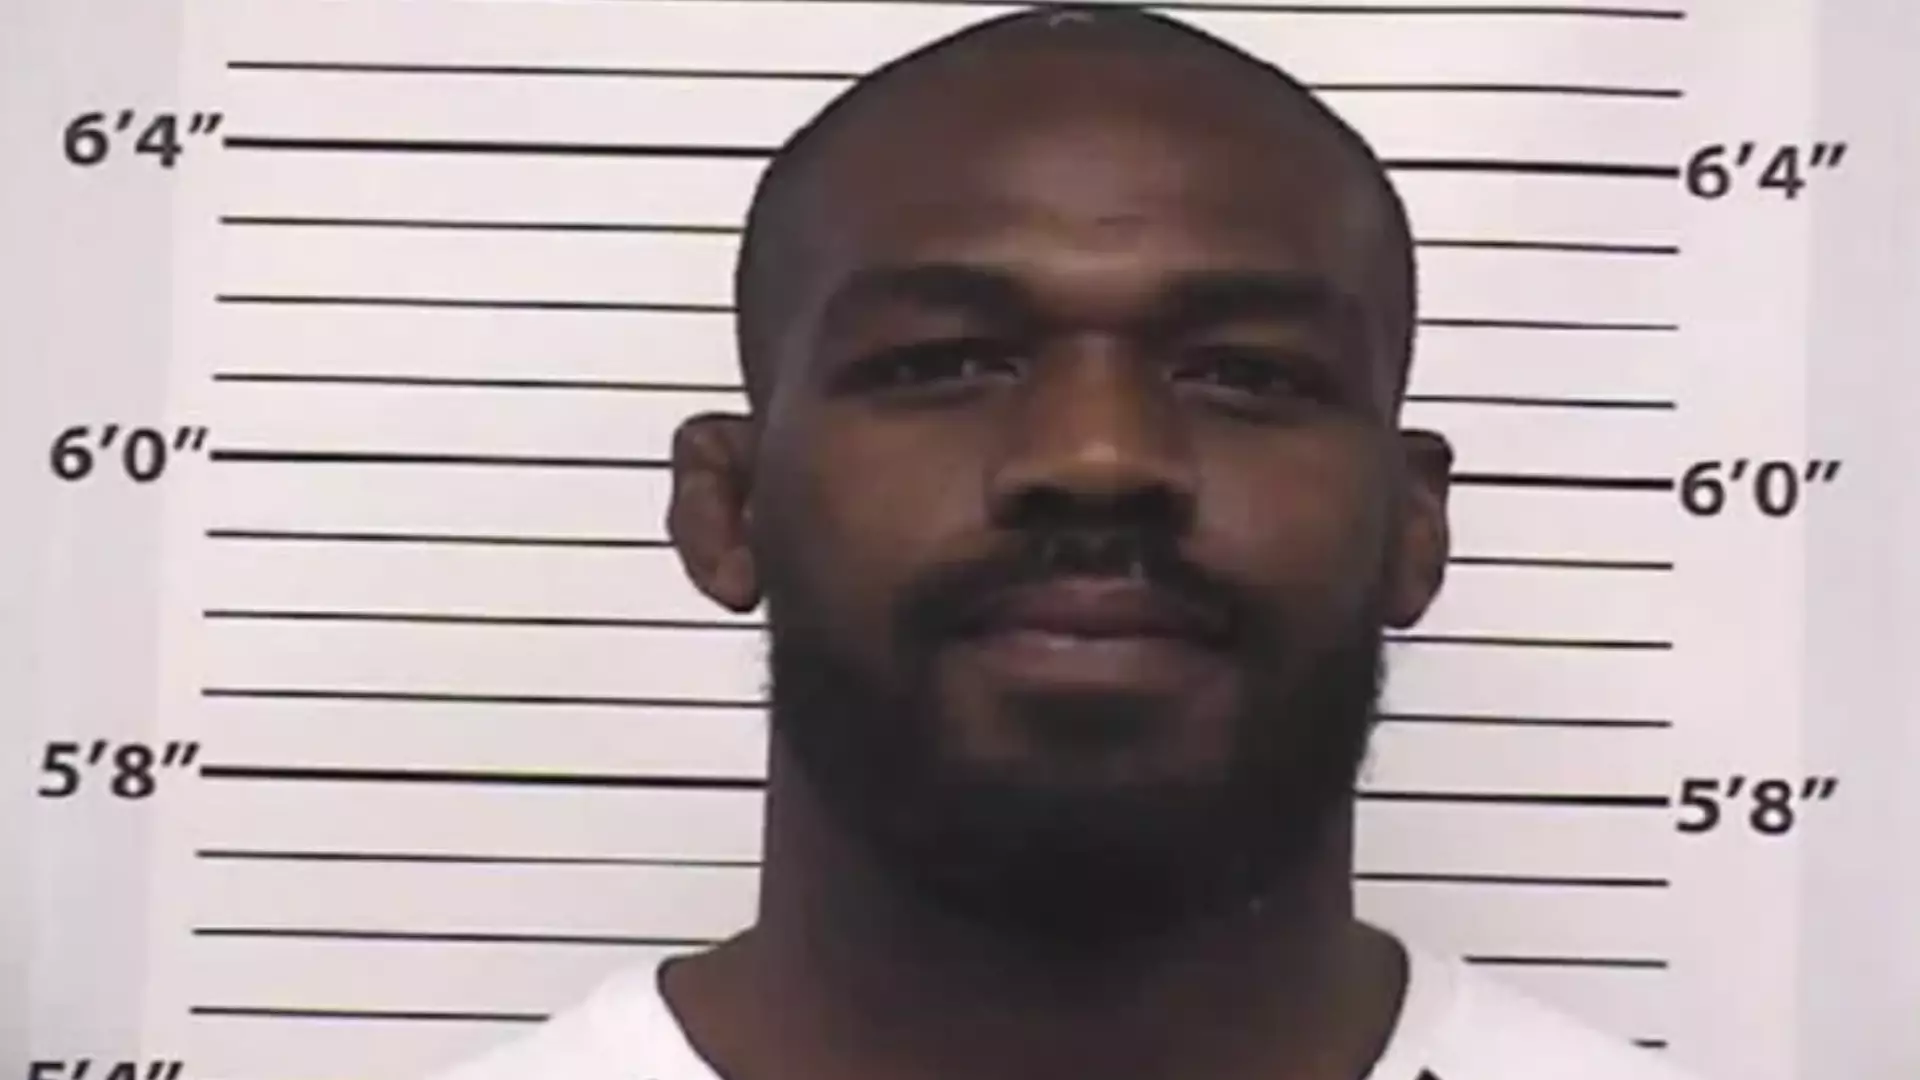 UFC Legend Jon Jones Has Been Arrested For Gun Charge And DWI In Albuquerque